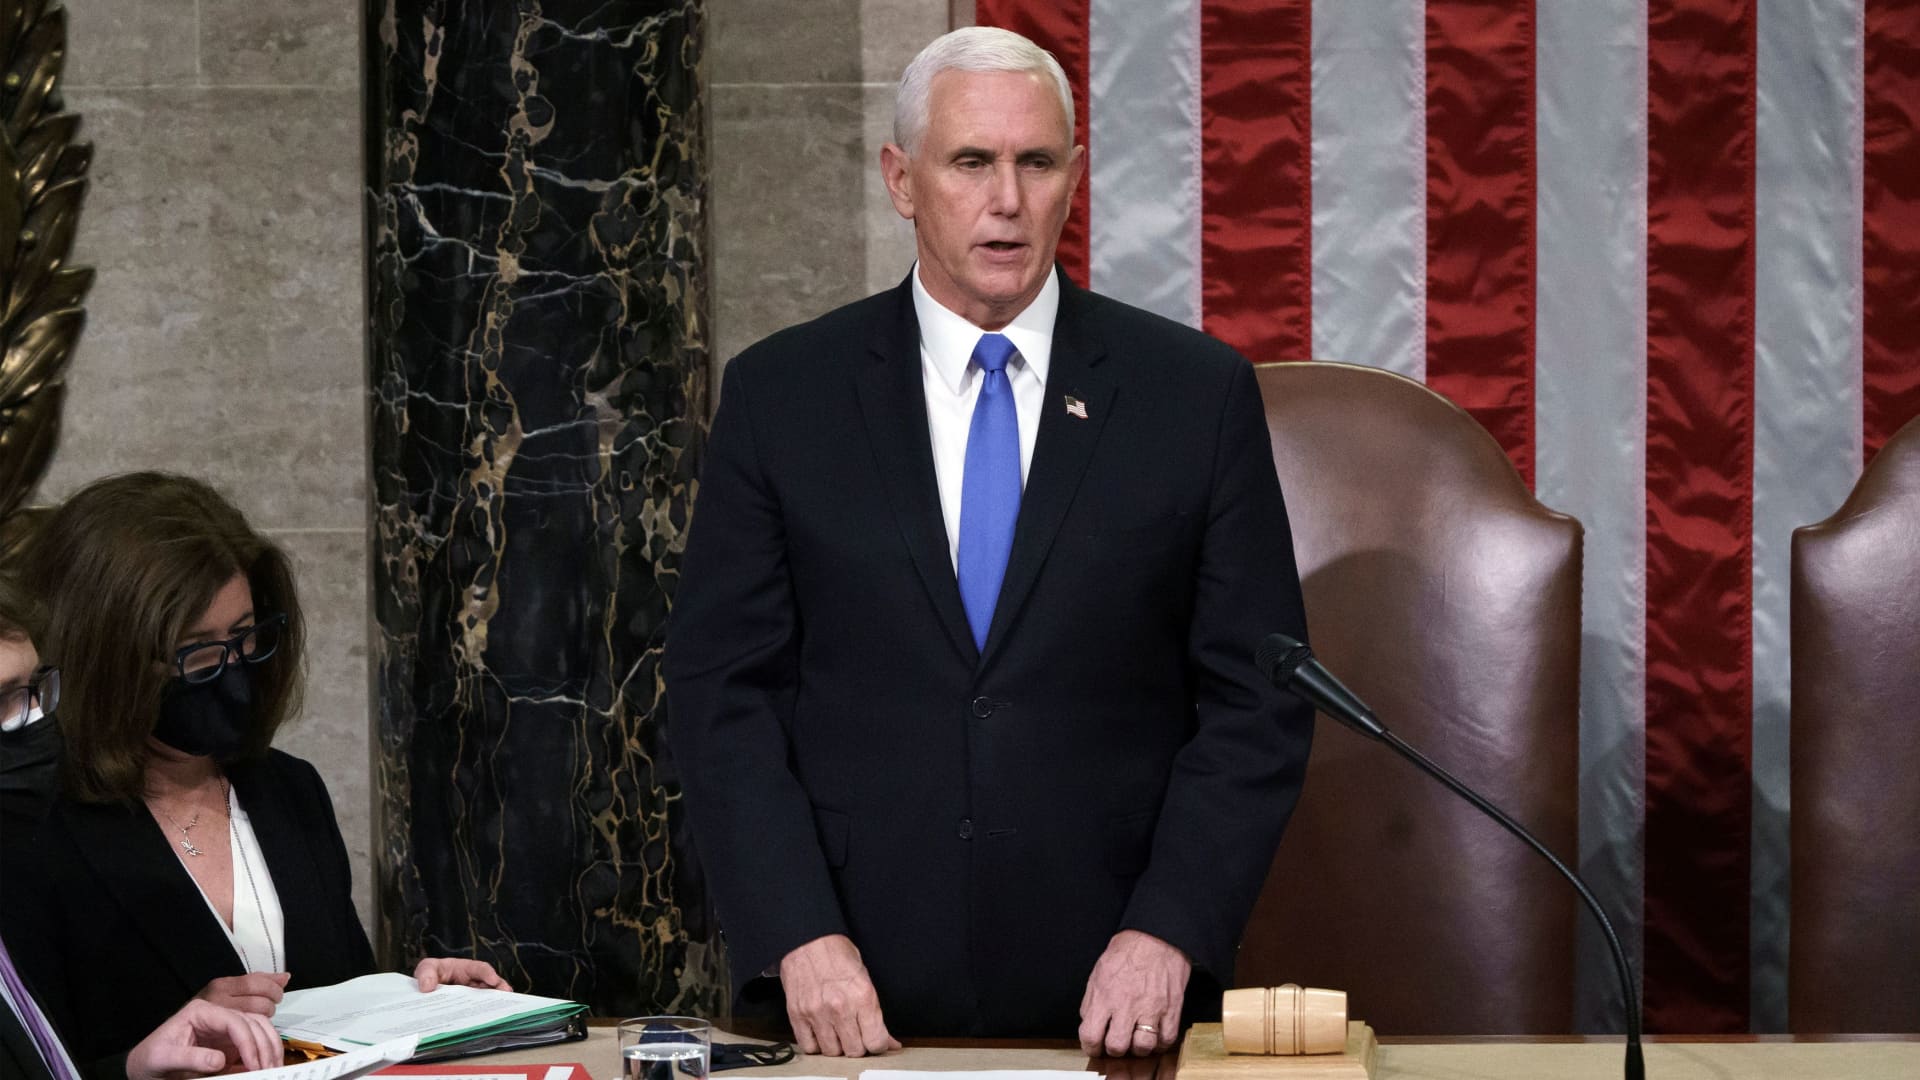 U.S. Vice President Mike Pence reads the final certification of Electoral College votes cast in November's presidential election during a joint session of Congress after working through the night, at the Capitol in Washington, January 7, 2021.